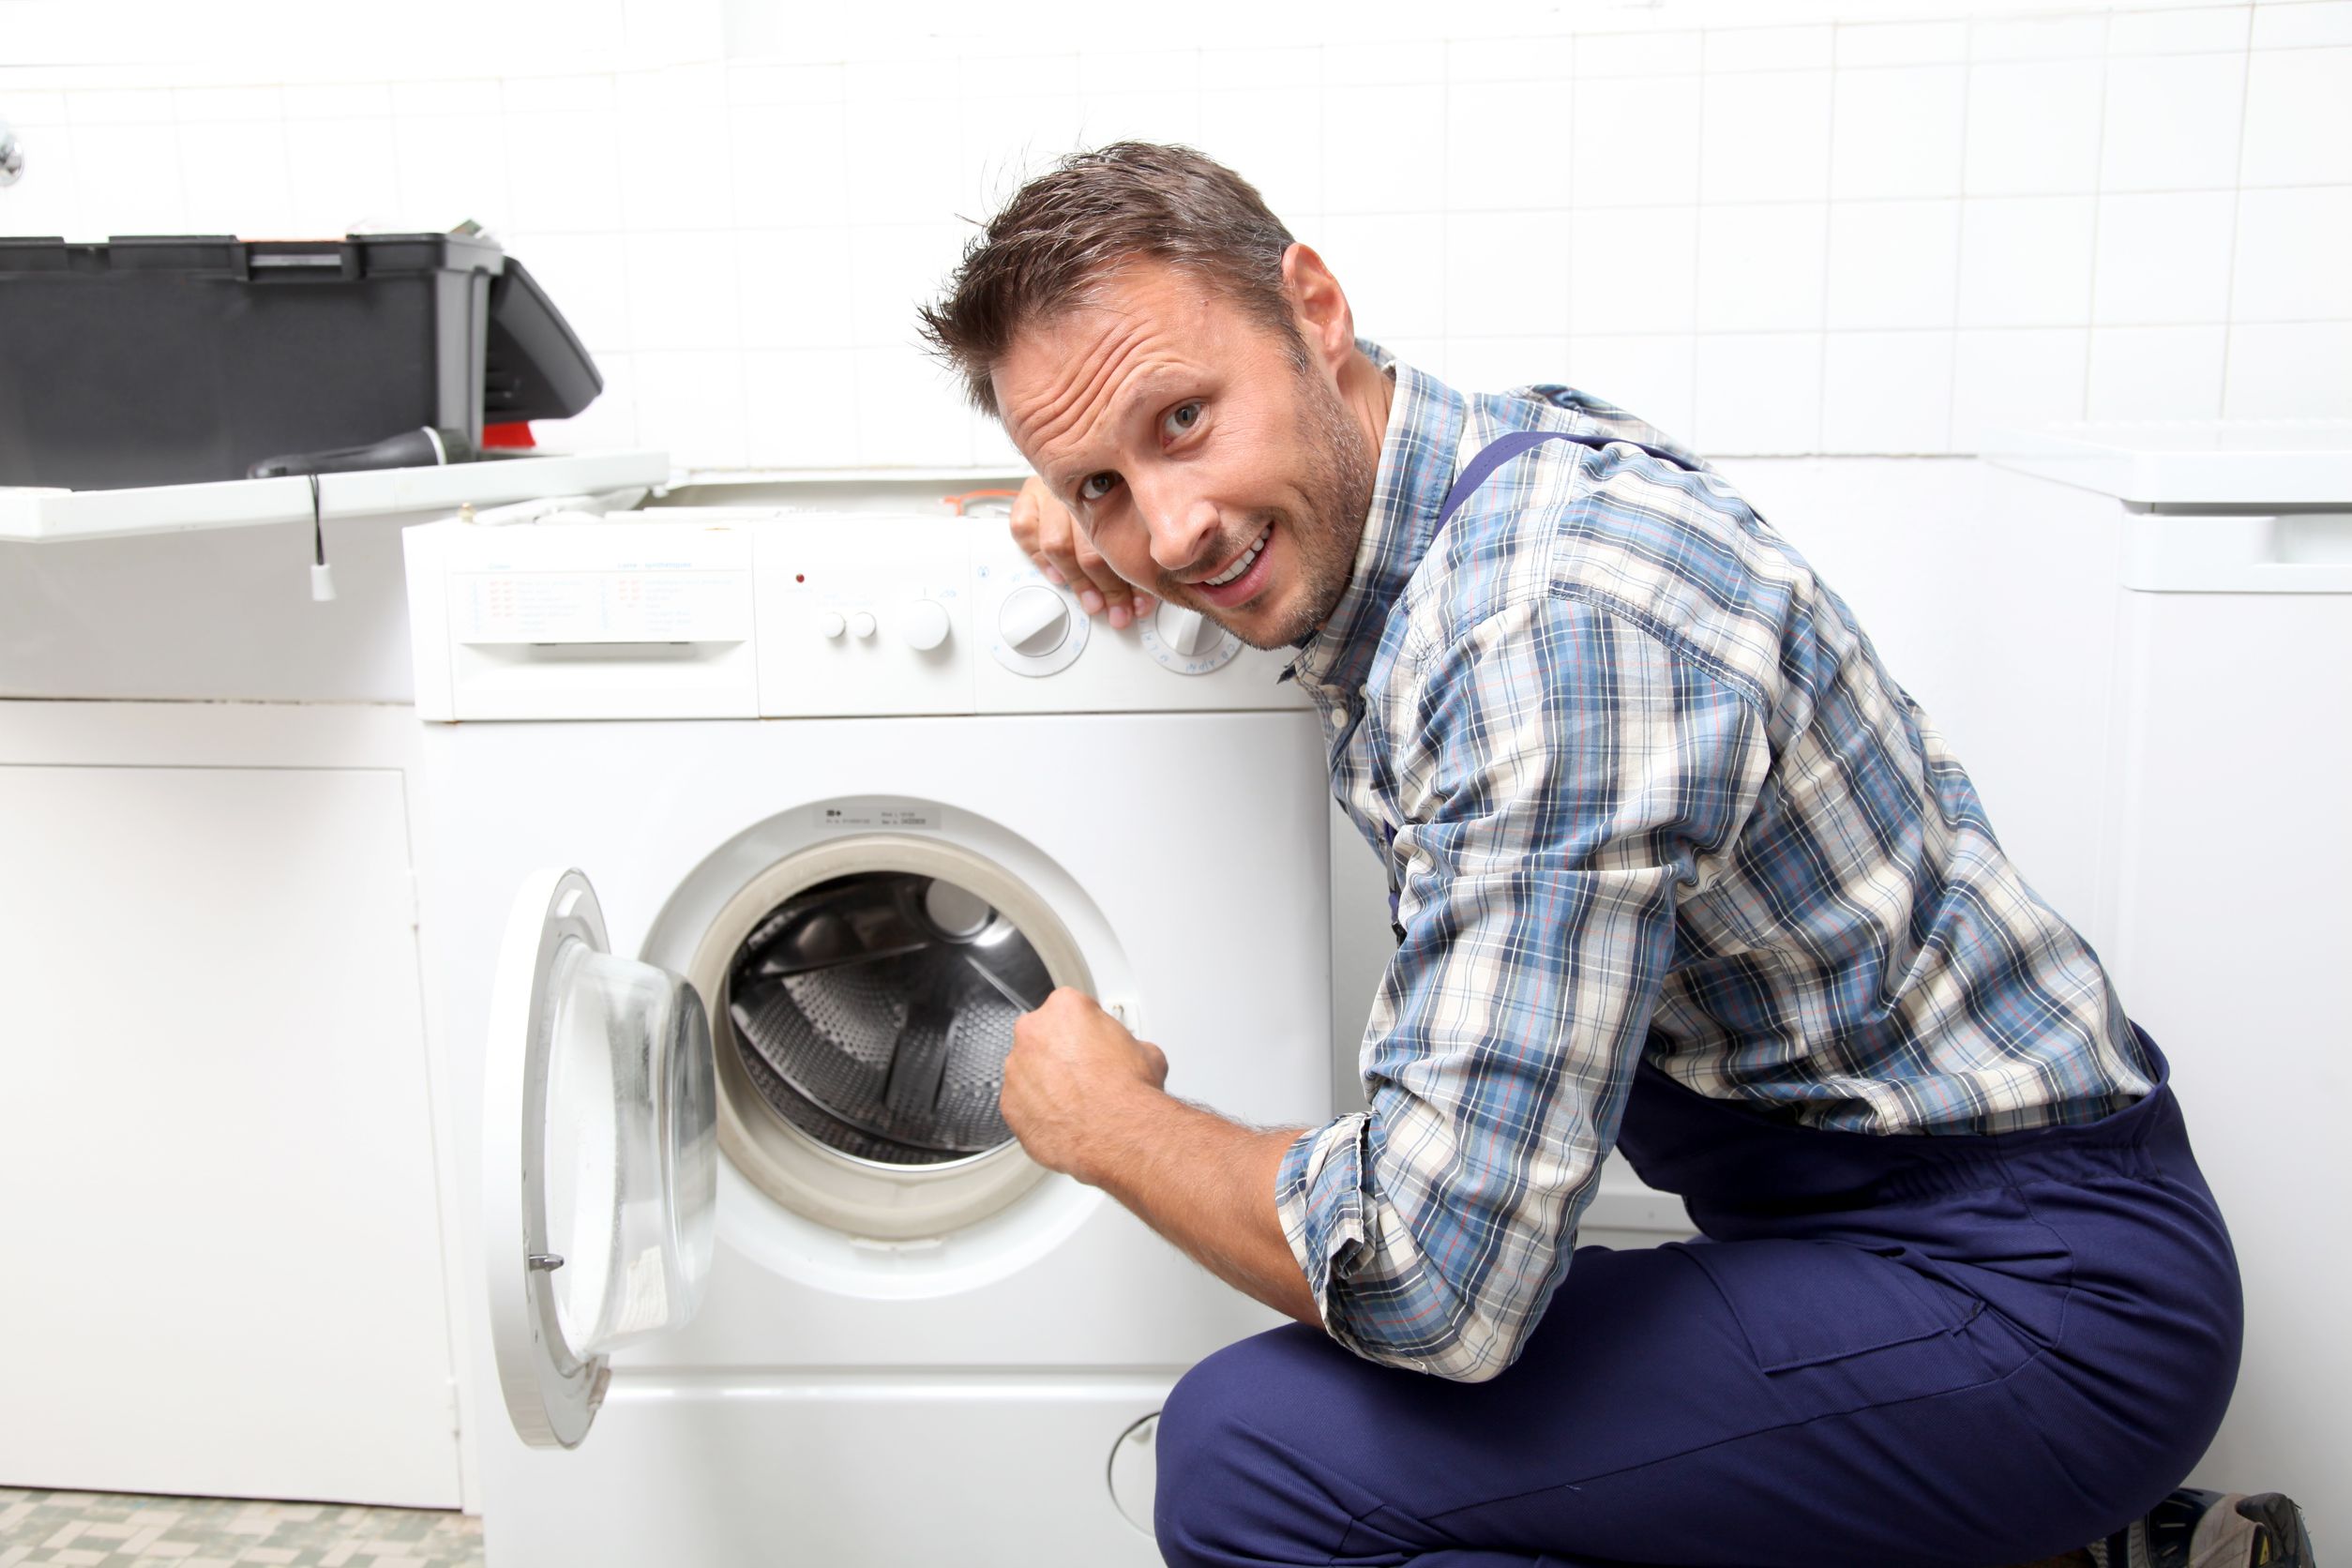 Reasons Why Squeaks and Squeals Call for Washer Repair in Arlington, VA